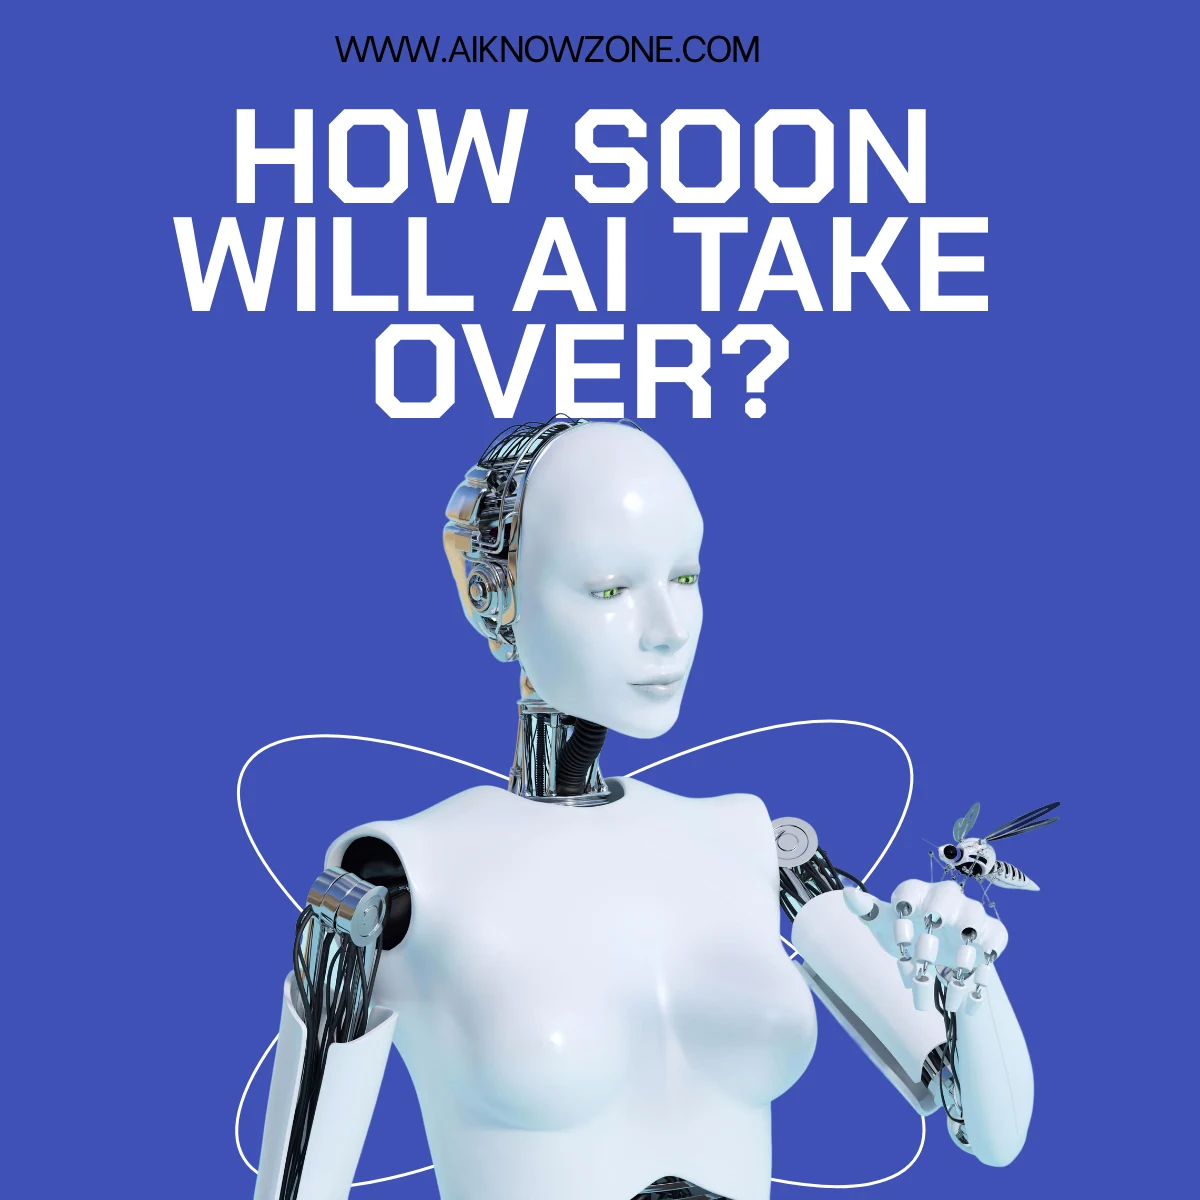 How soon will AI take over?